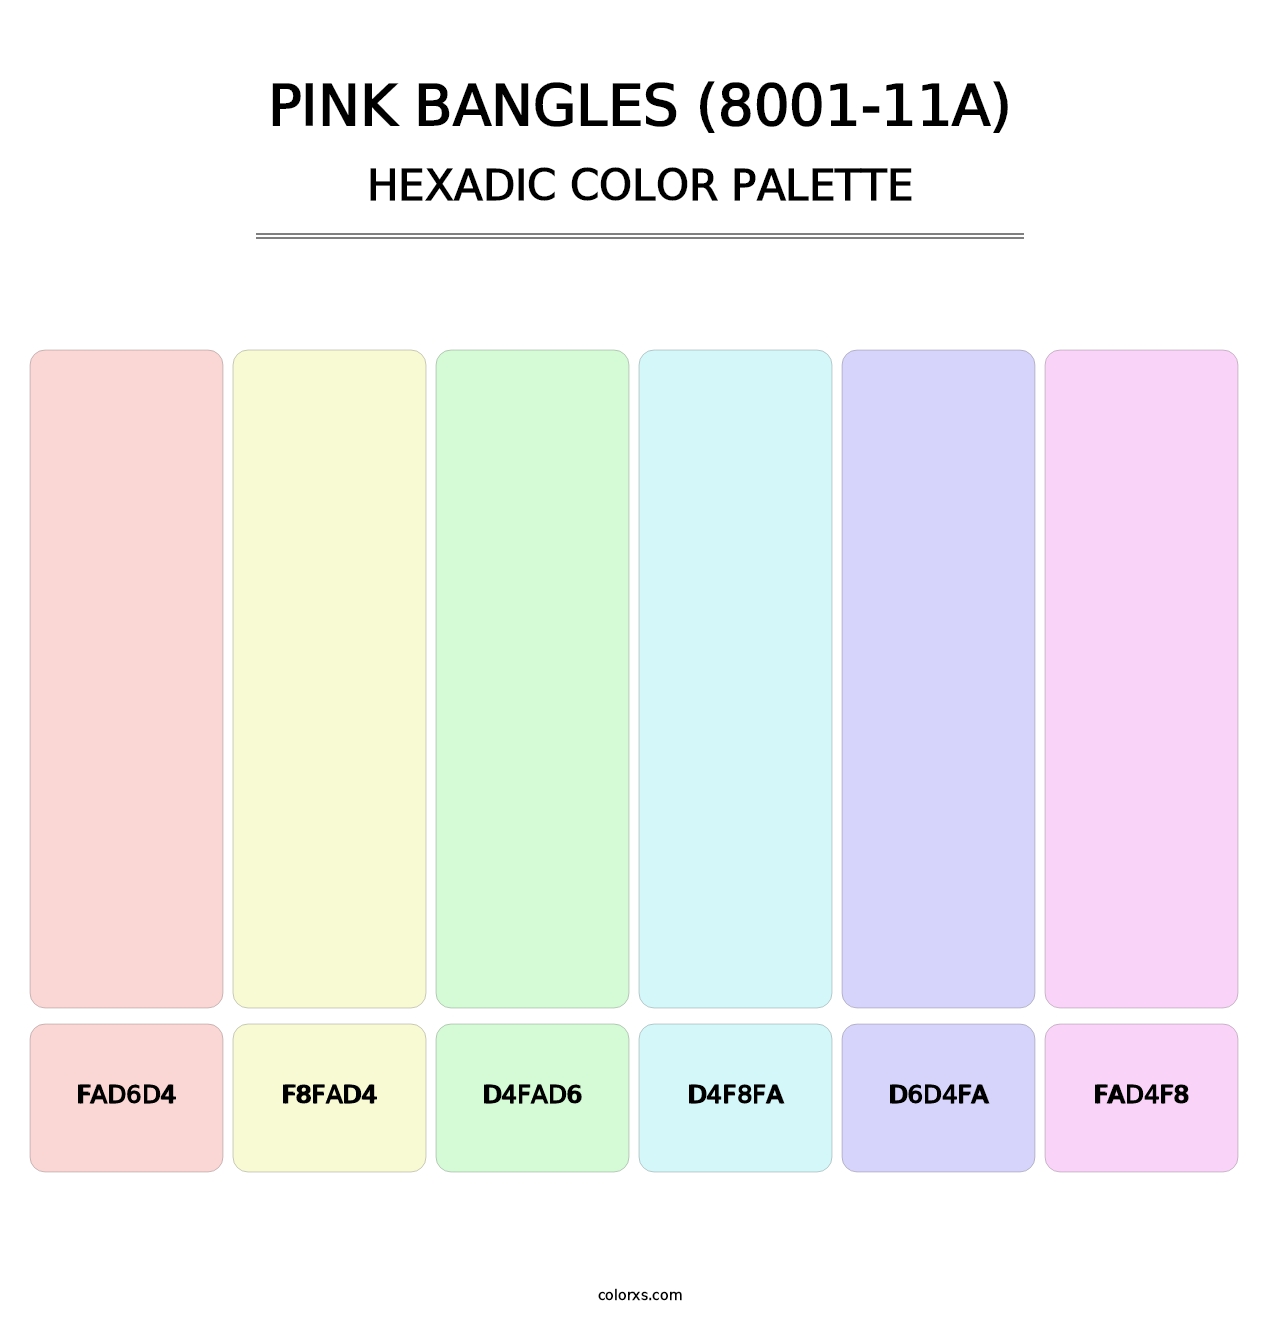 Pink Bangles (8001-11A) - Hexadic Color Palette